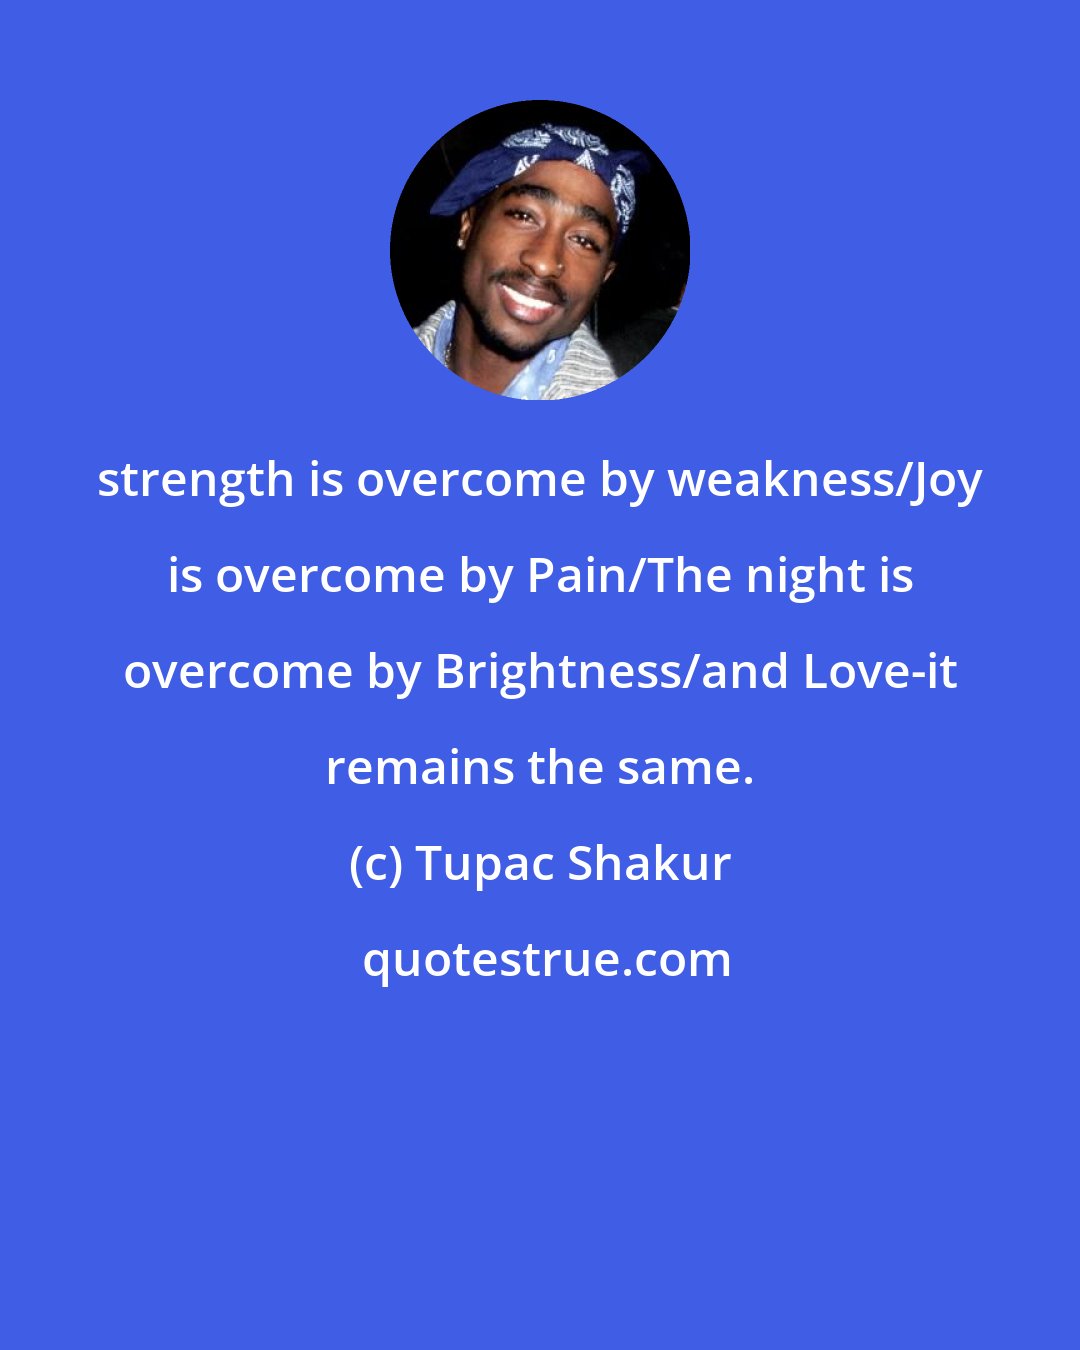 Tupac Shakur: strength is overcome by weakness/Joy is overcome by Pain/The night is overcome by Brightness/and Love-it remains the same.